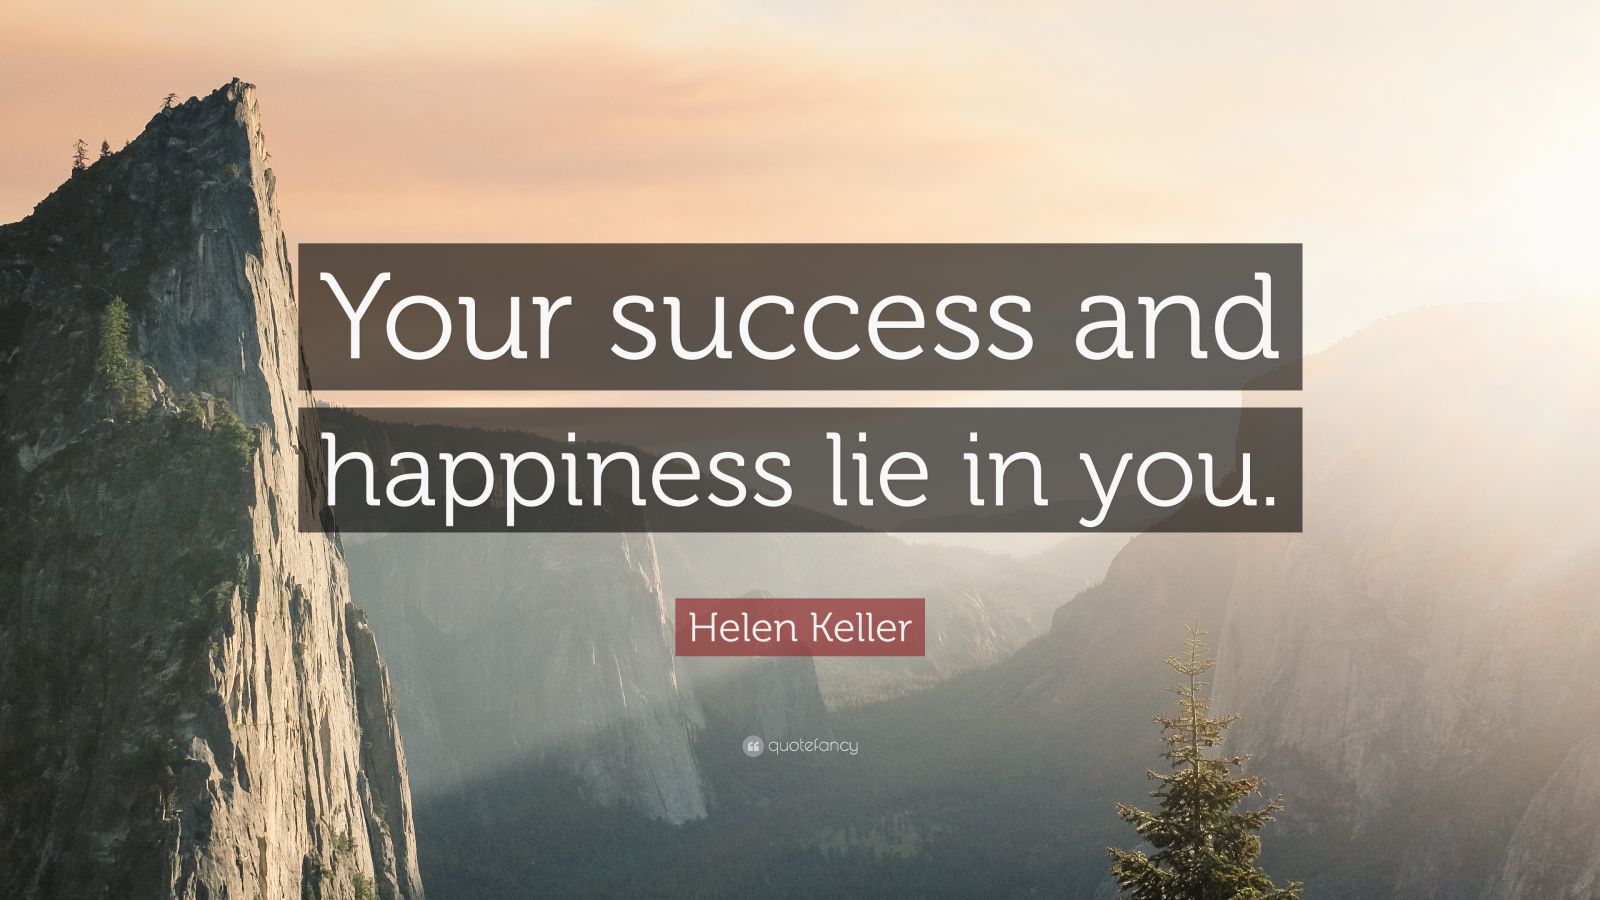 Helen Keller Quote Your Success And Happiness Lie In You Wallpapers Quotefancy